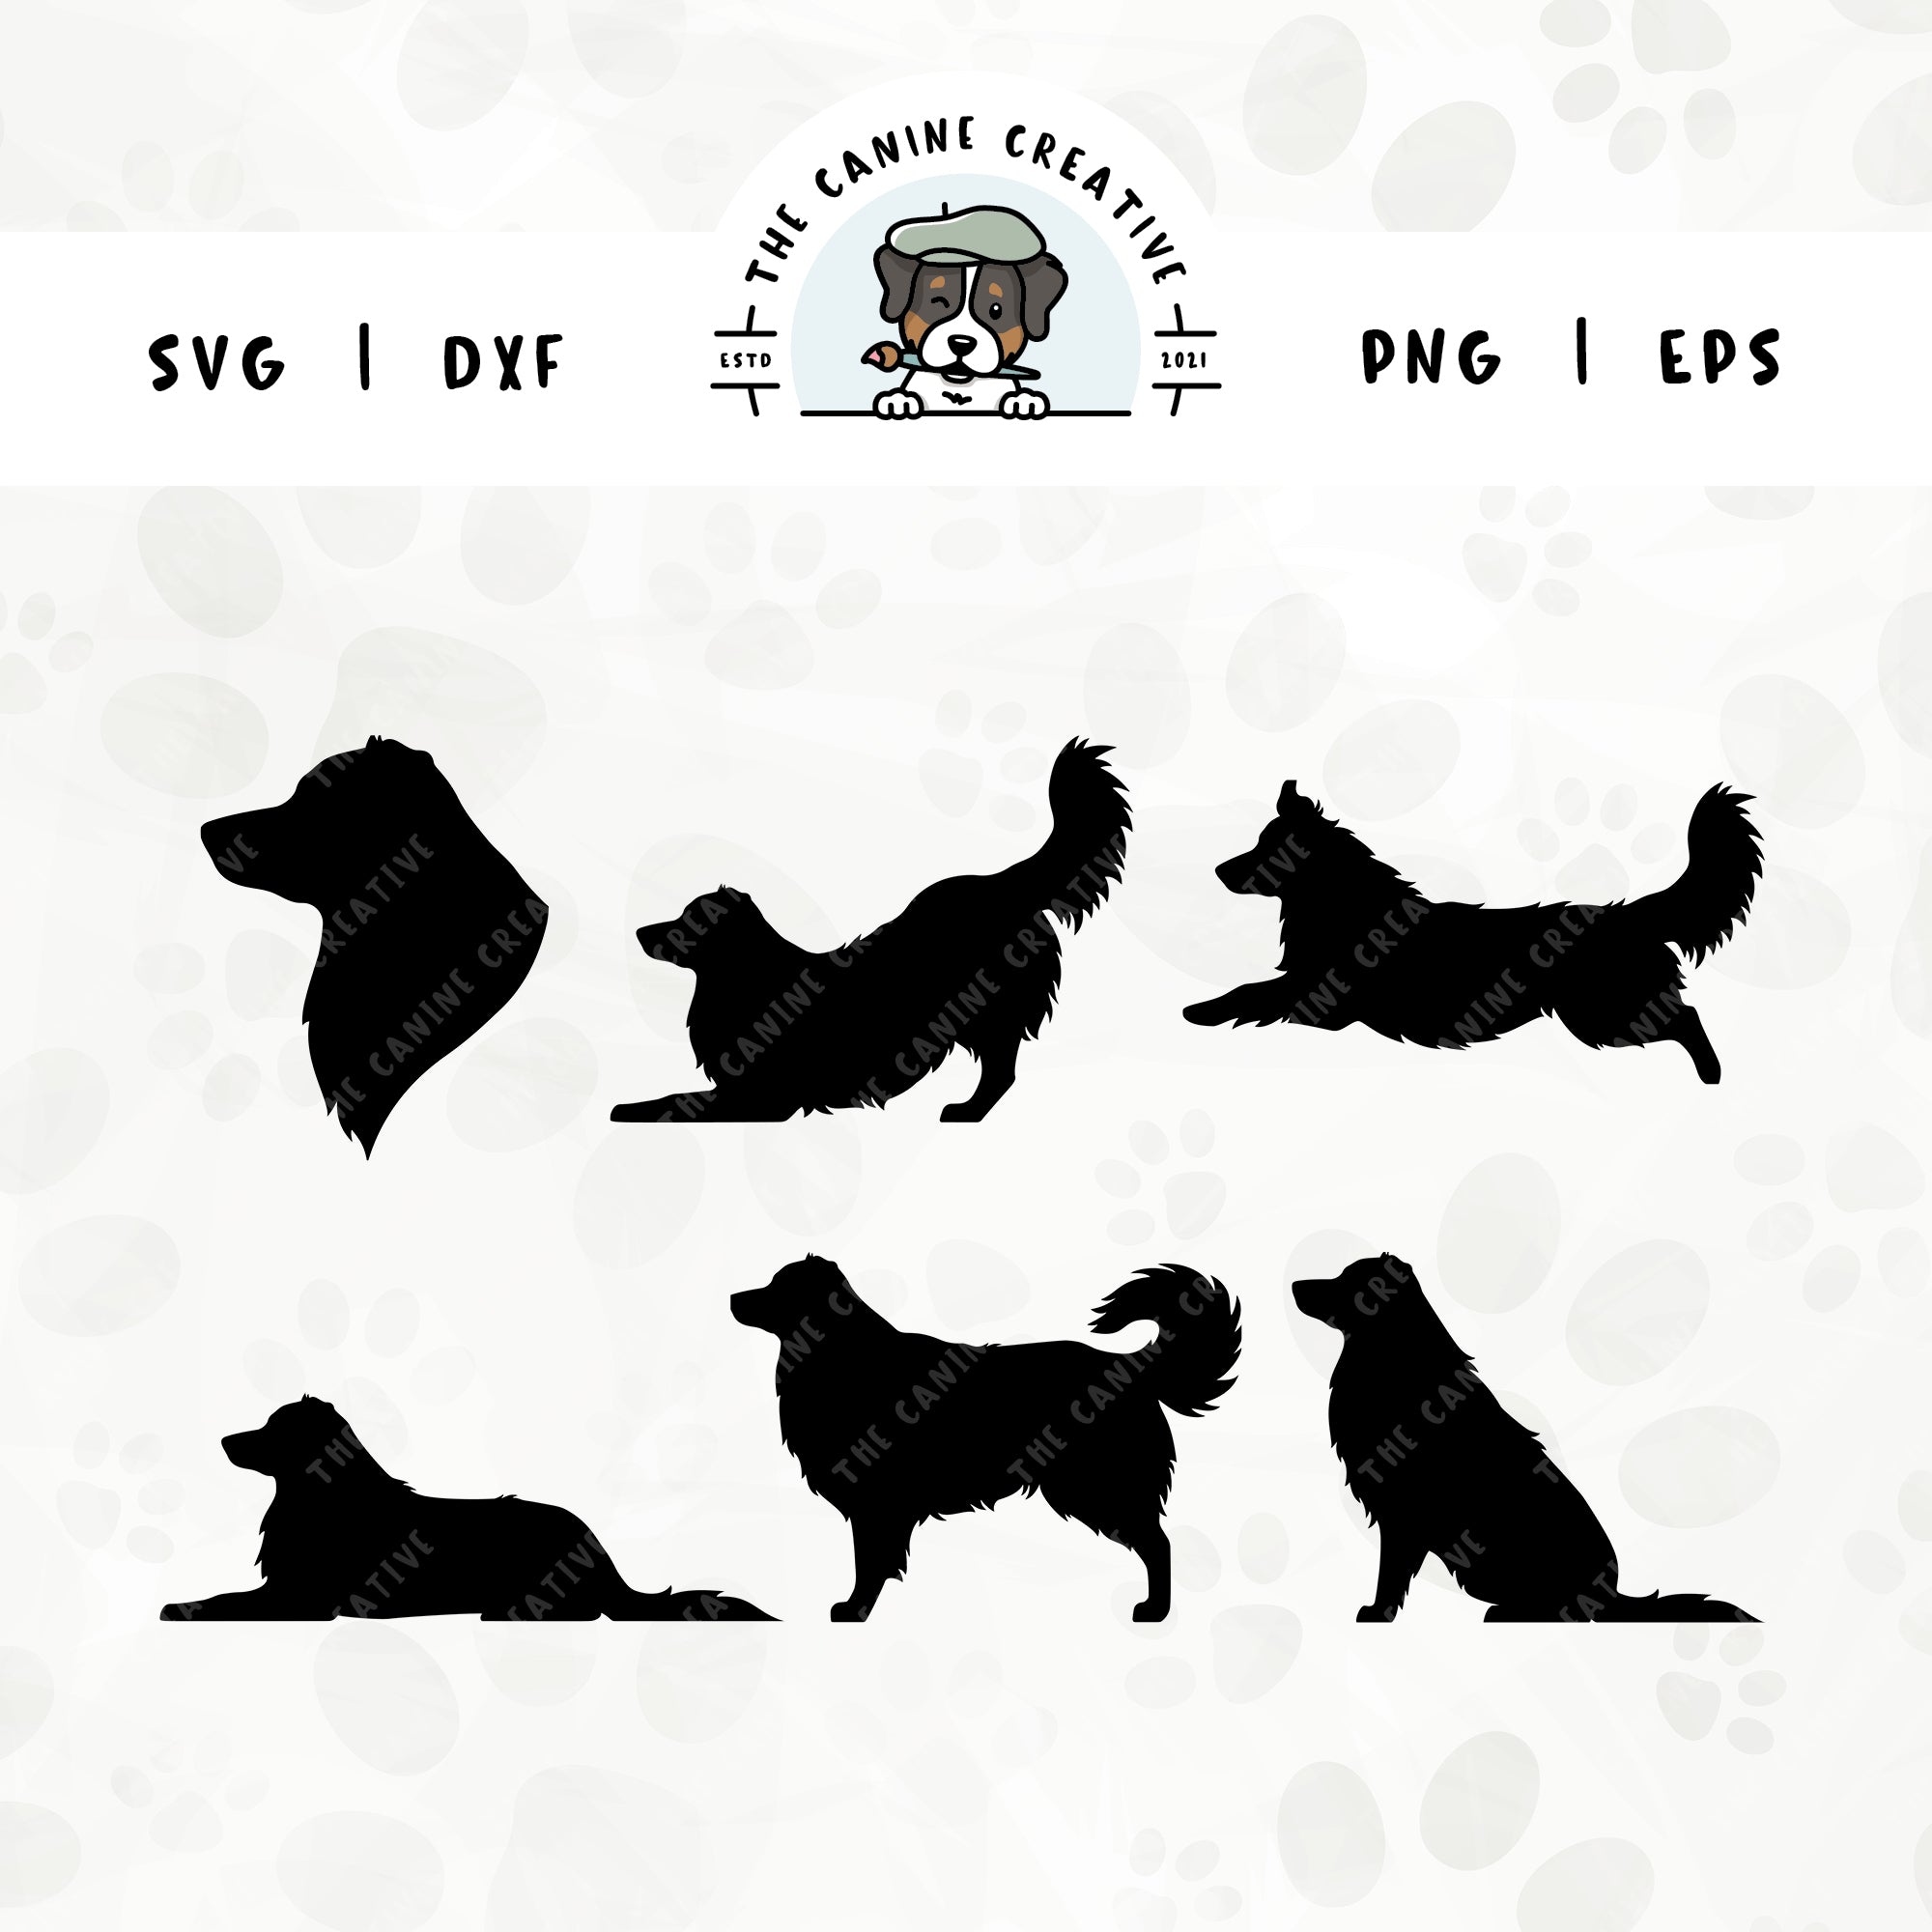 This 6-pack, long tail Australian Shepherd silhouette bundle (set 1) features a dog's head in profile, along with various poses including running, laying down, playing, standing, and sitting. File formats include: SVG, DXF, PNG, and EPS.